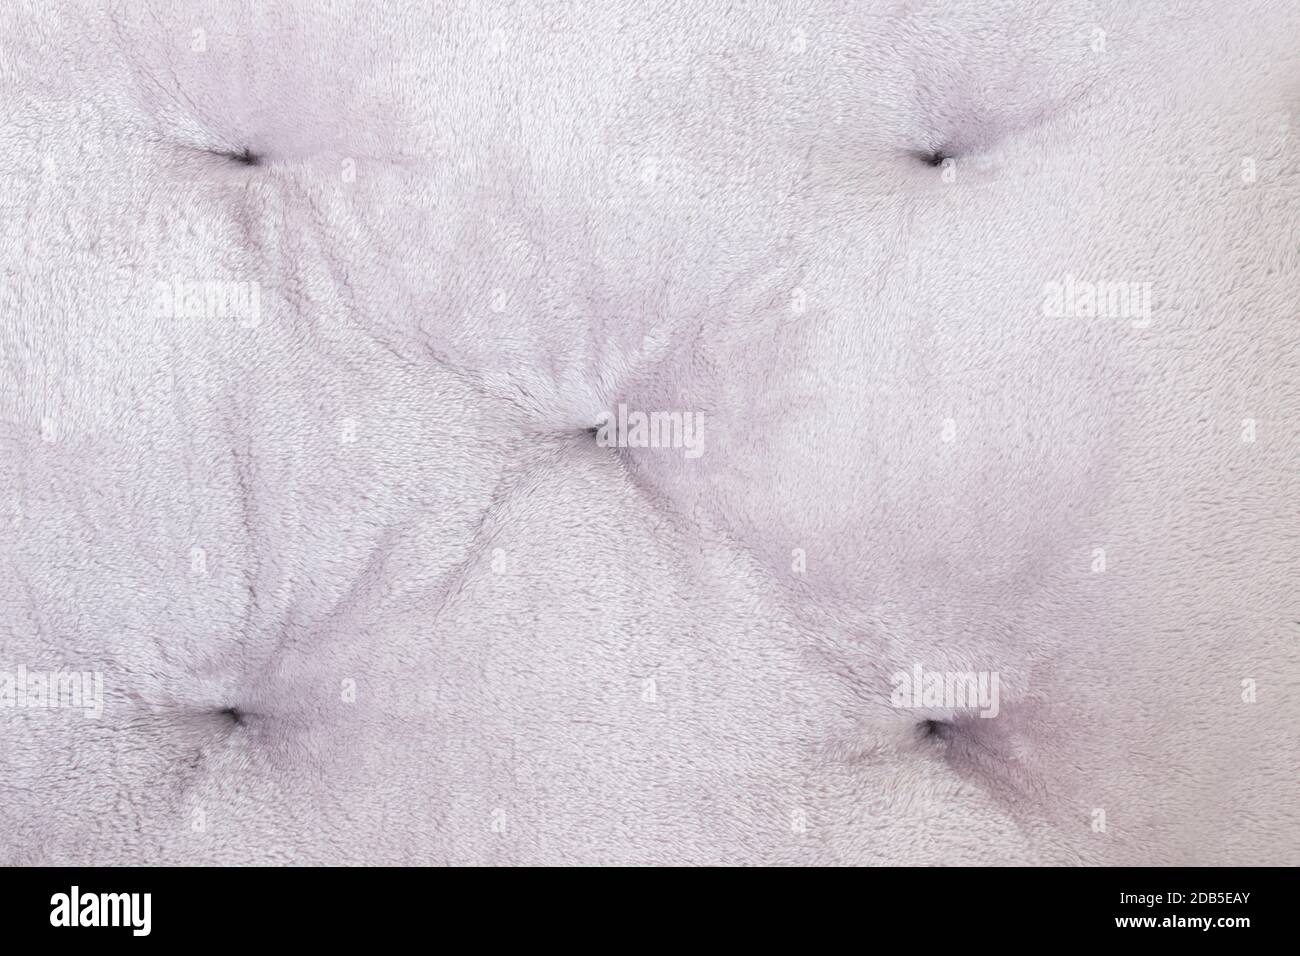 close top view of a bed mattress texture for domestic pet. Stock Photo